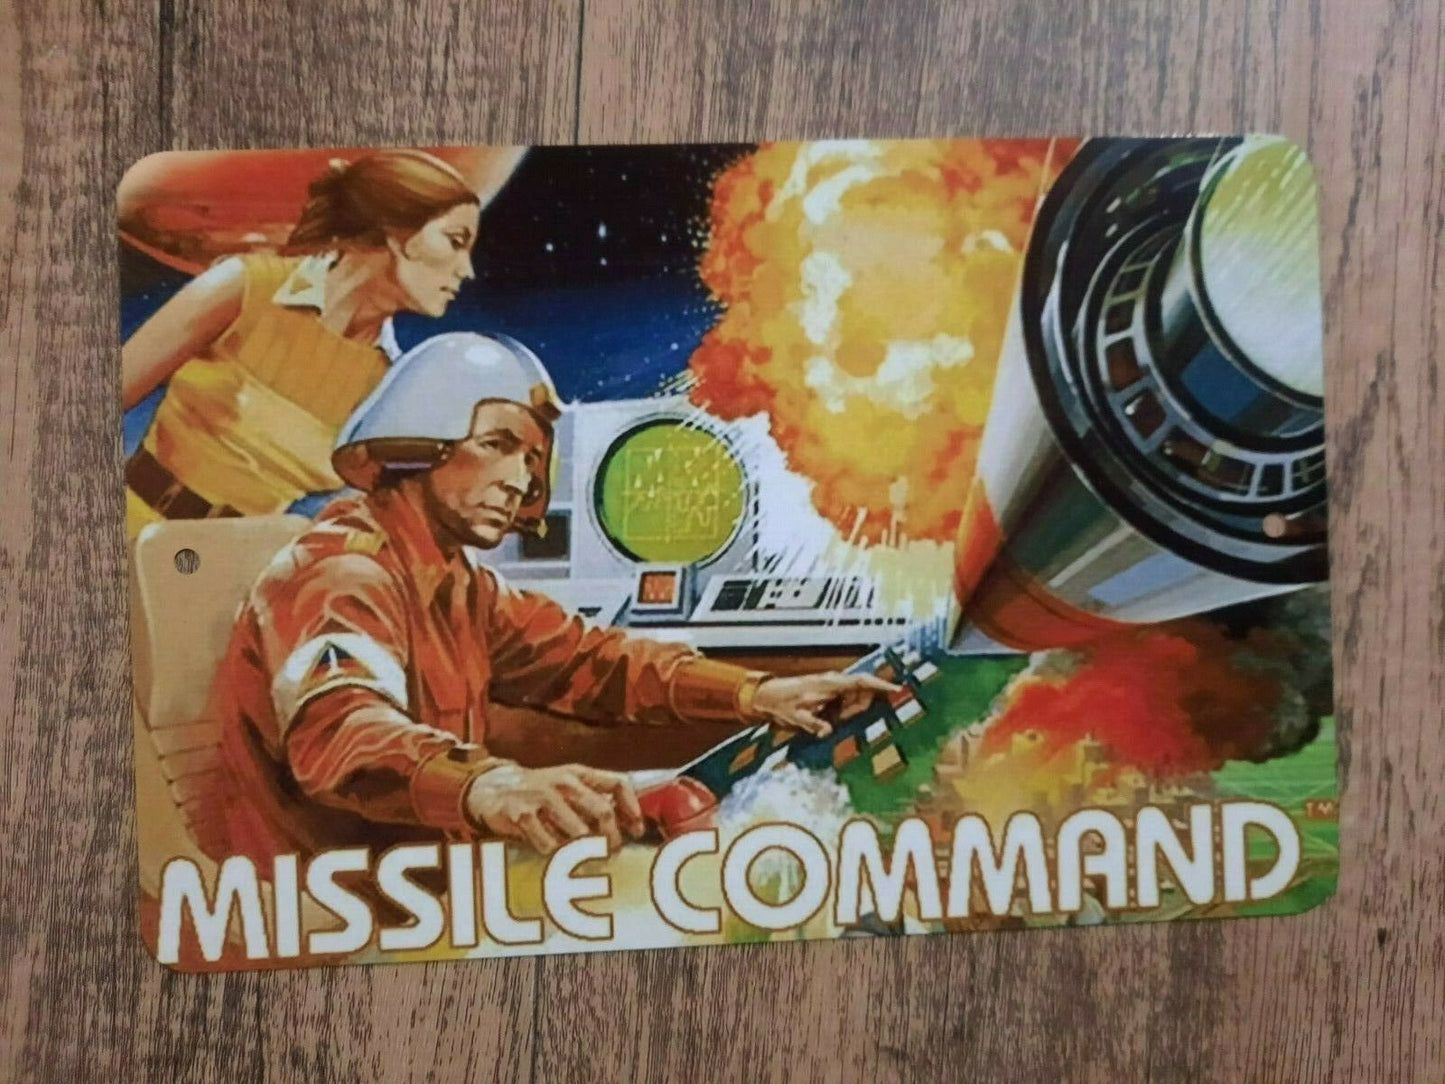 Missile Command 8x12 Metal Wall Sign Classic Arcade Video Game